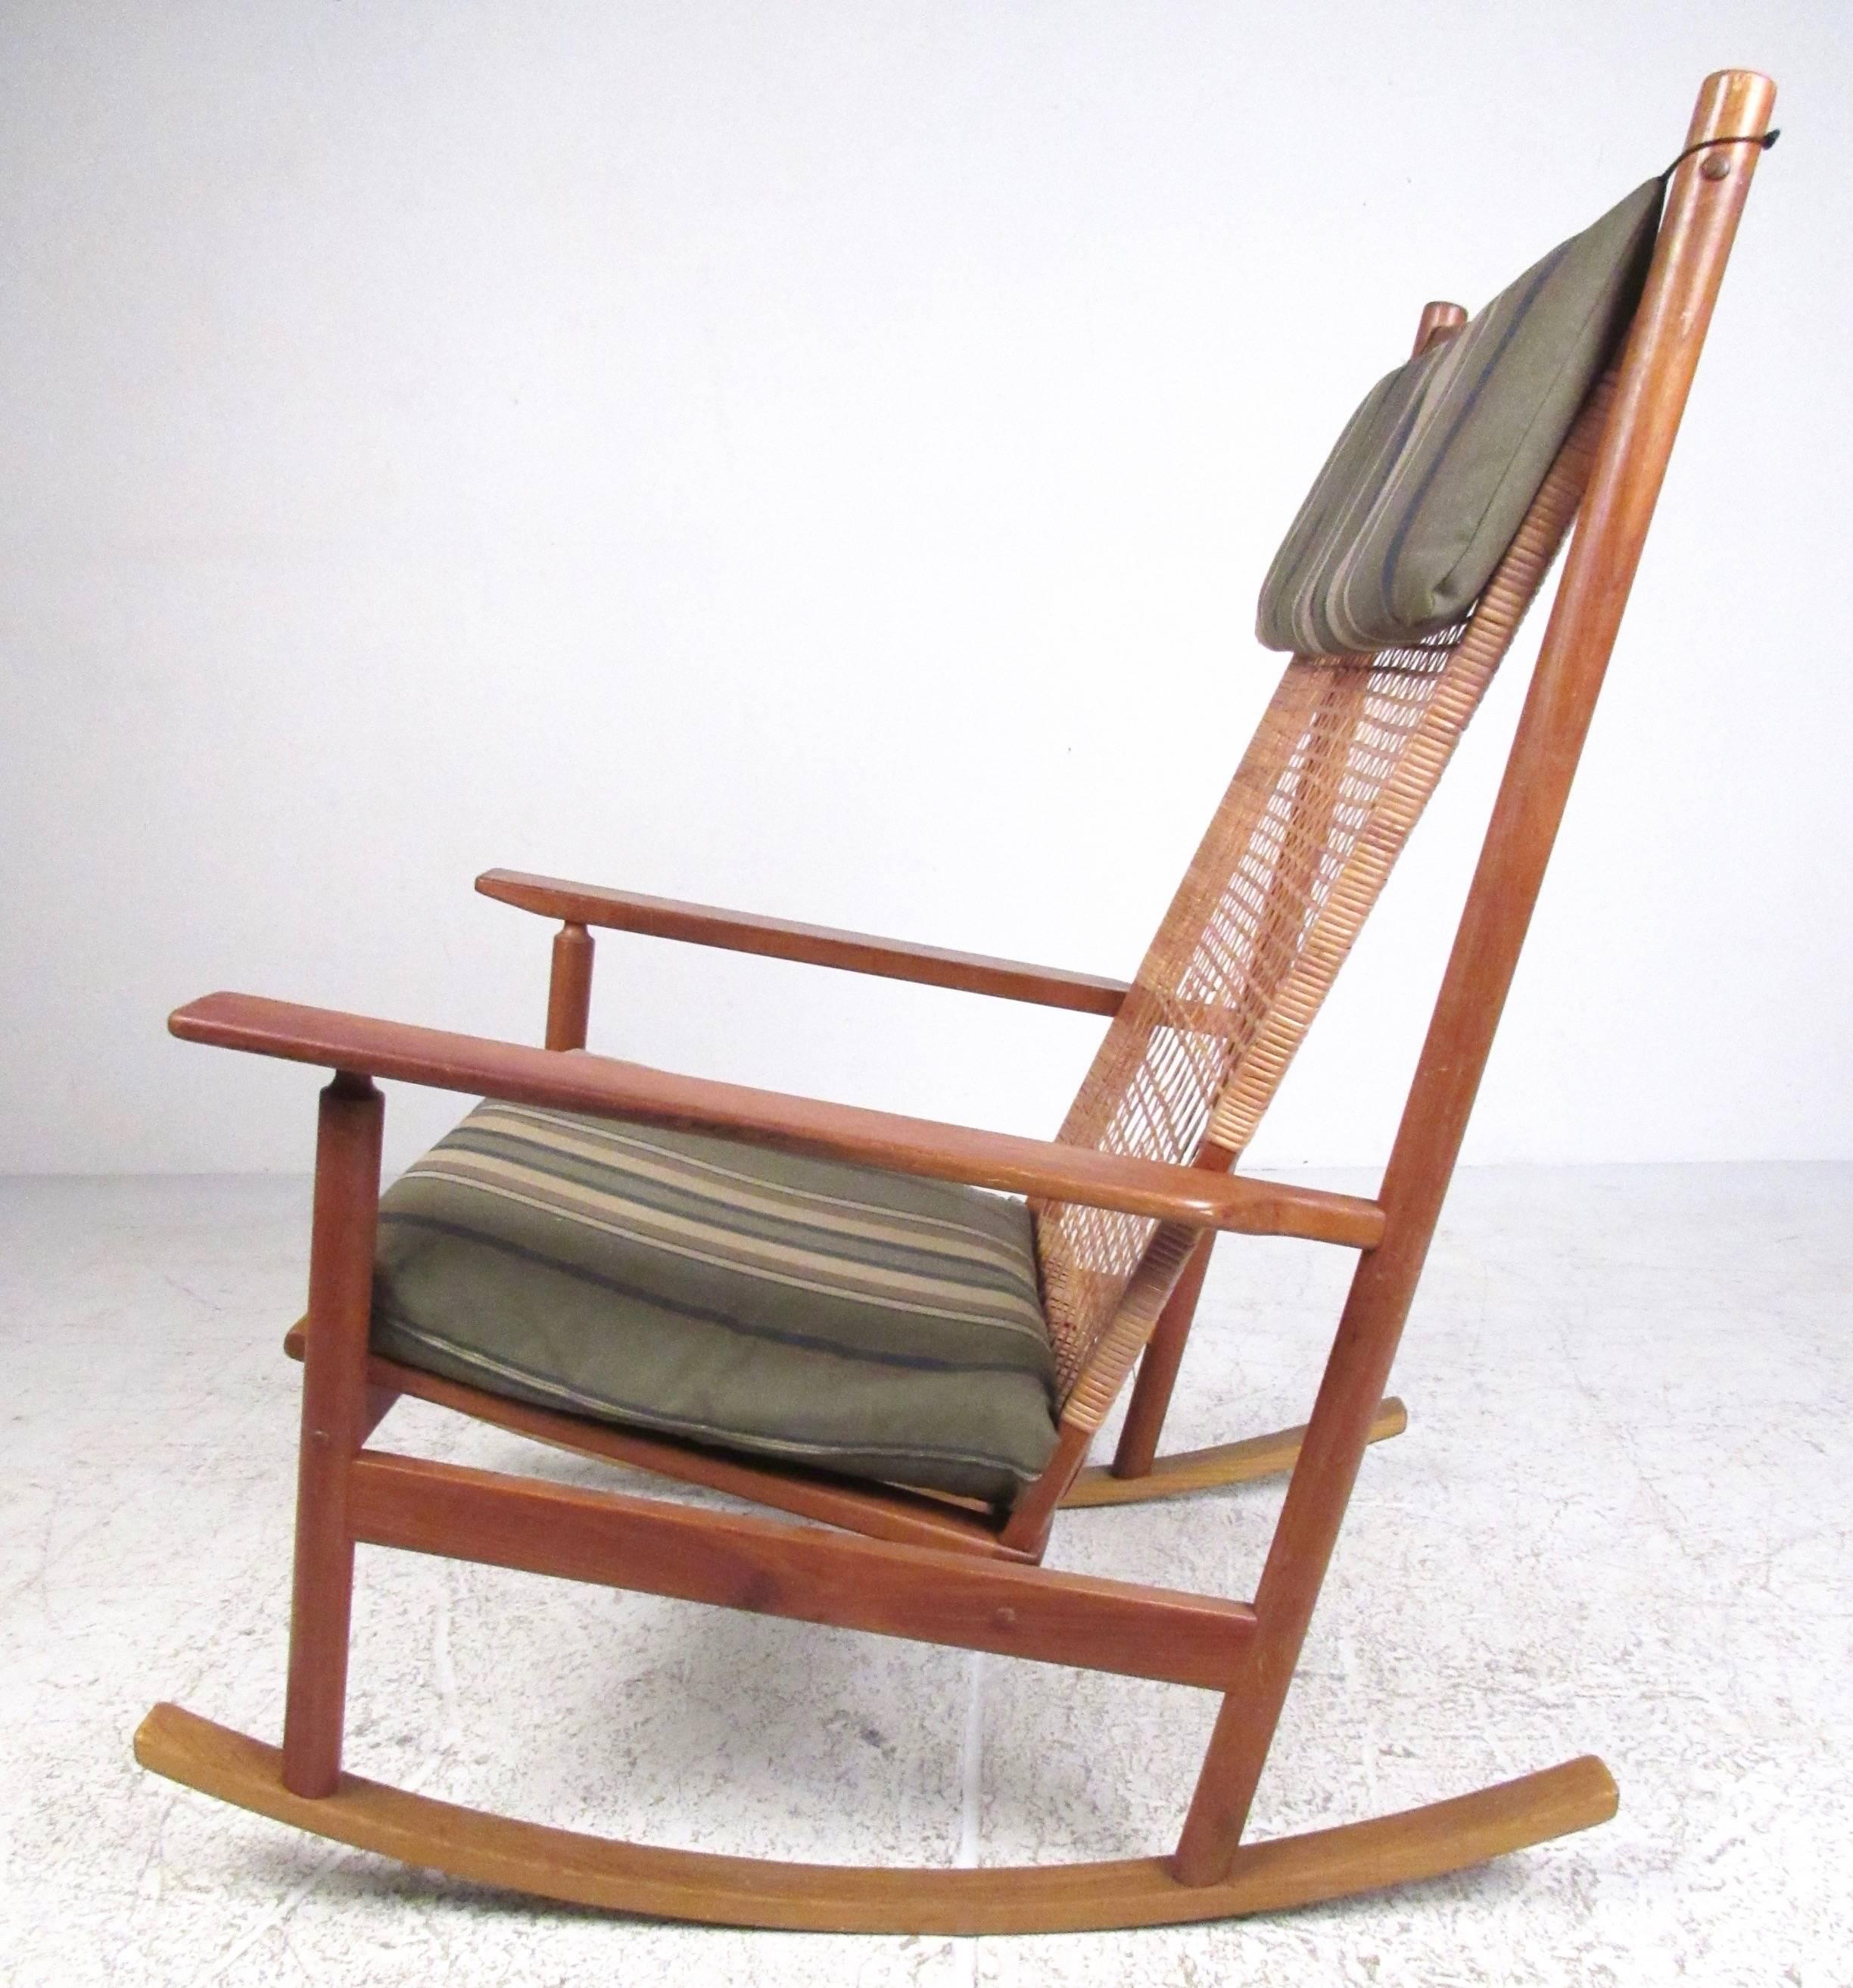 This impressive vintage modern rocking chair features high back teak frame with vintage cane webbing. Added cushion for headrest and seat, iconic Scandinavian Modern design by Hans Olsen for Juul Kristensen. Please confirm item location (NY or NJ).